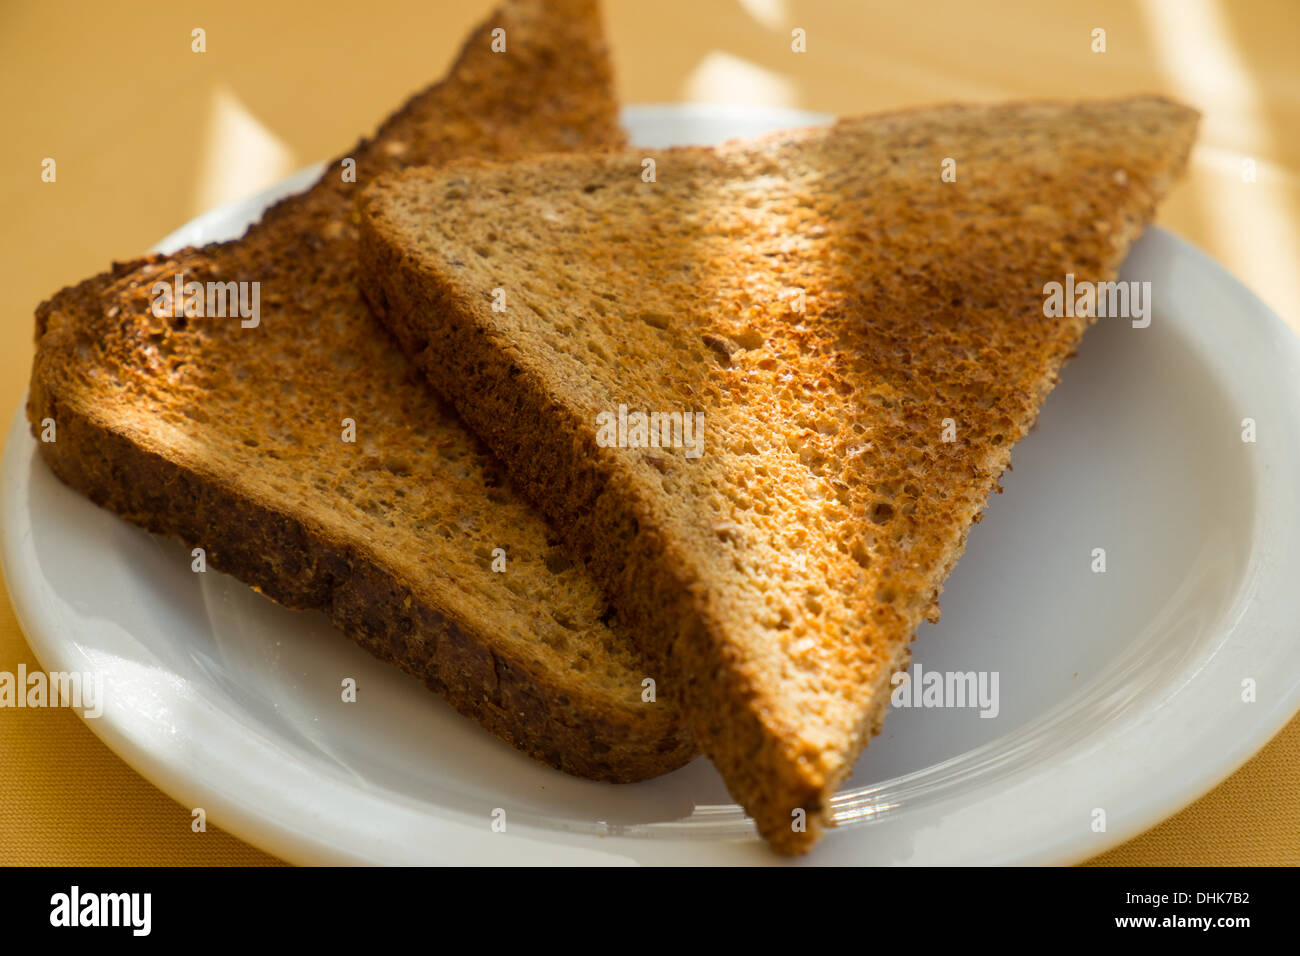 Two slices of brown toast sitting on a white plate with rays of sun across them. Stock Photo